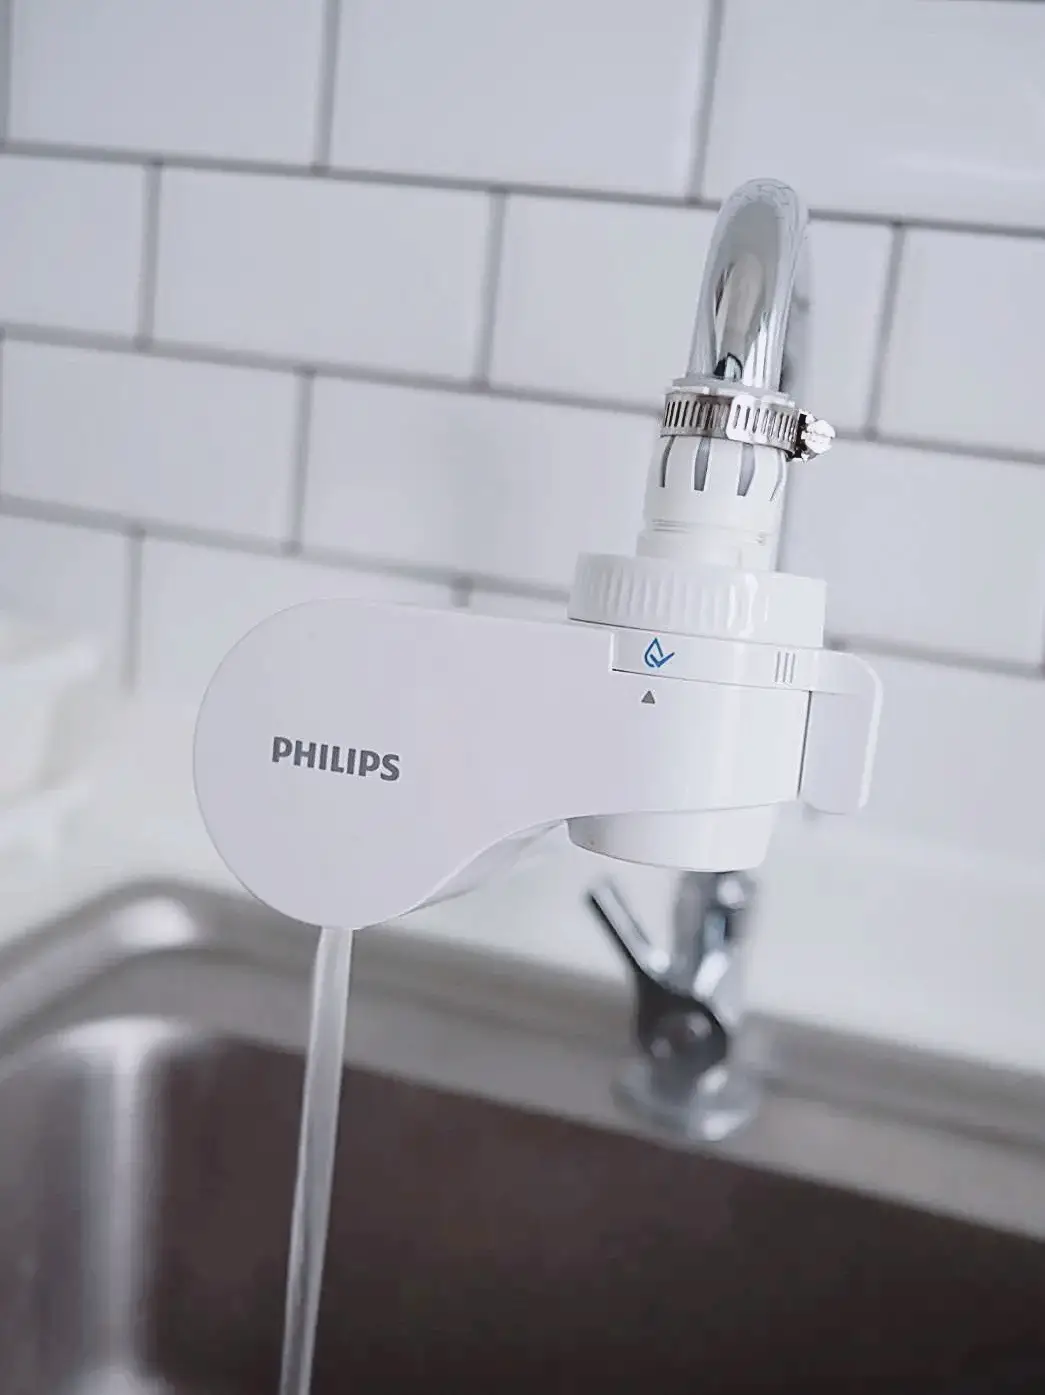 Philips Tap Water Filter - Unboxing and Installation 